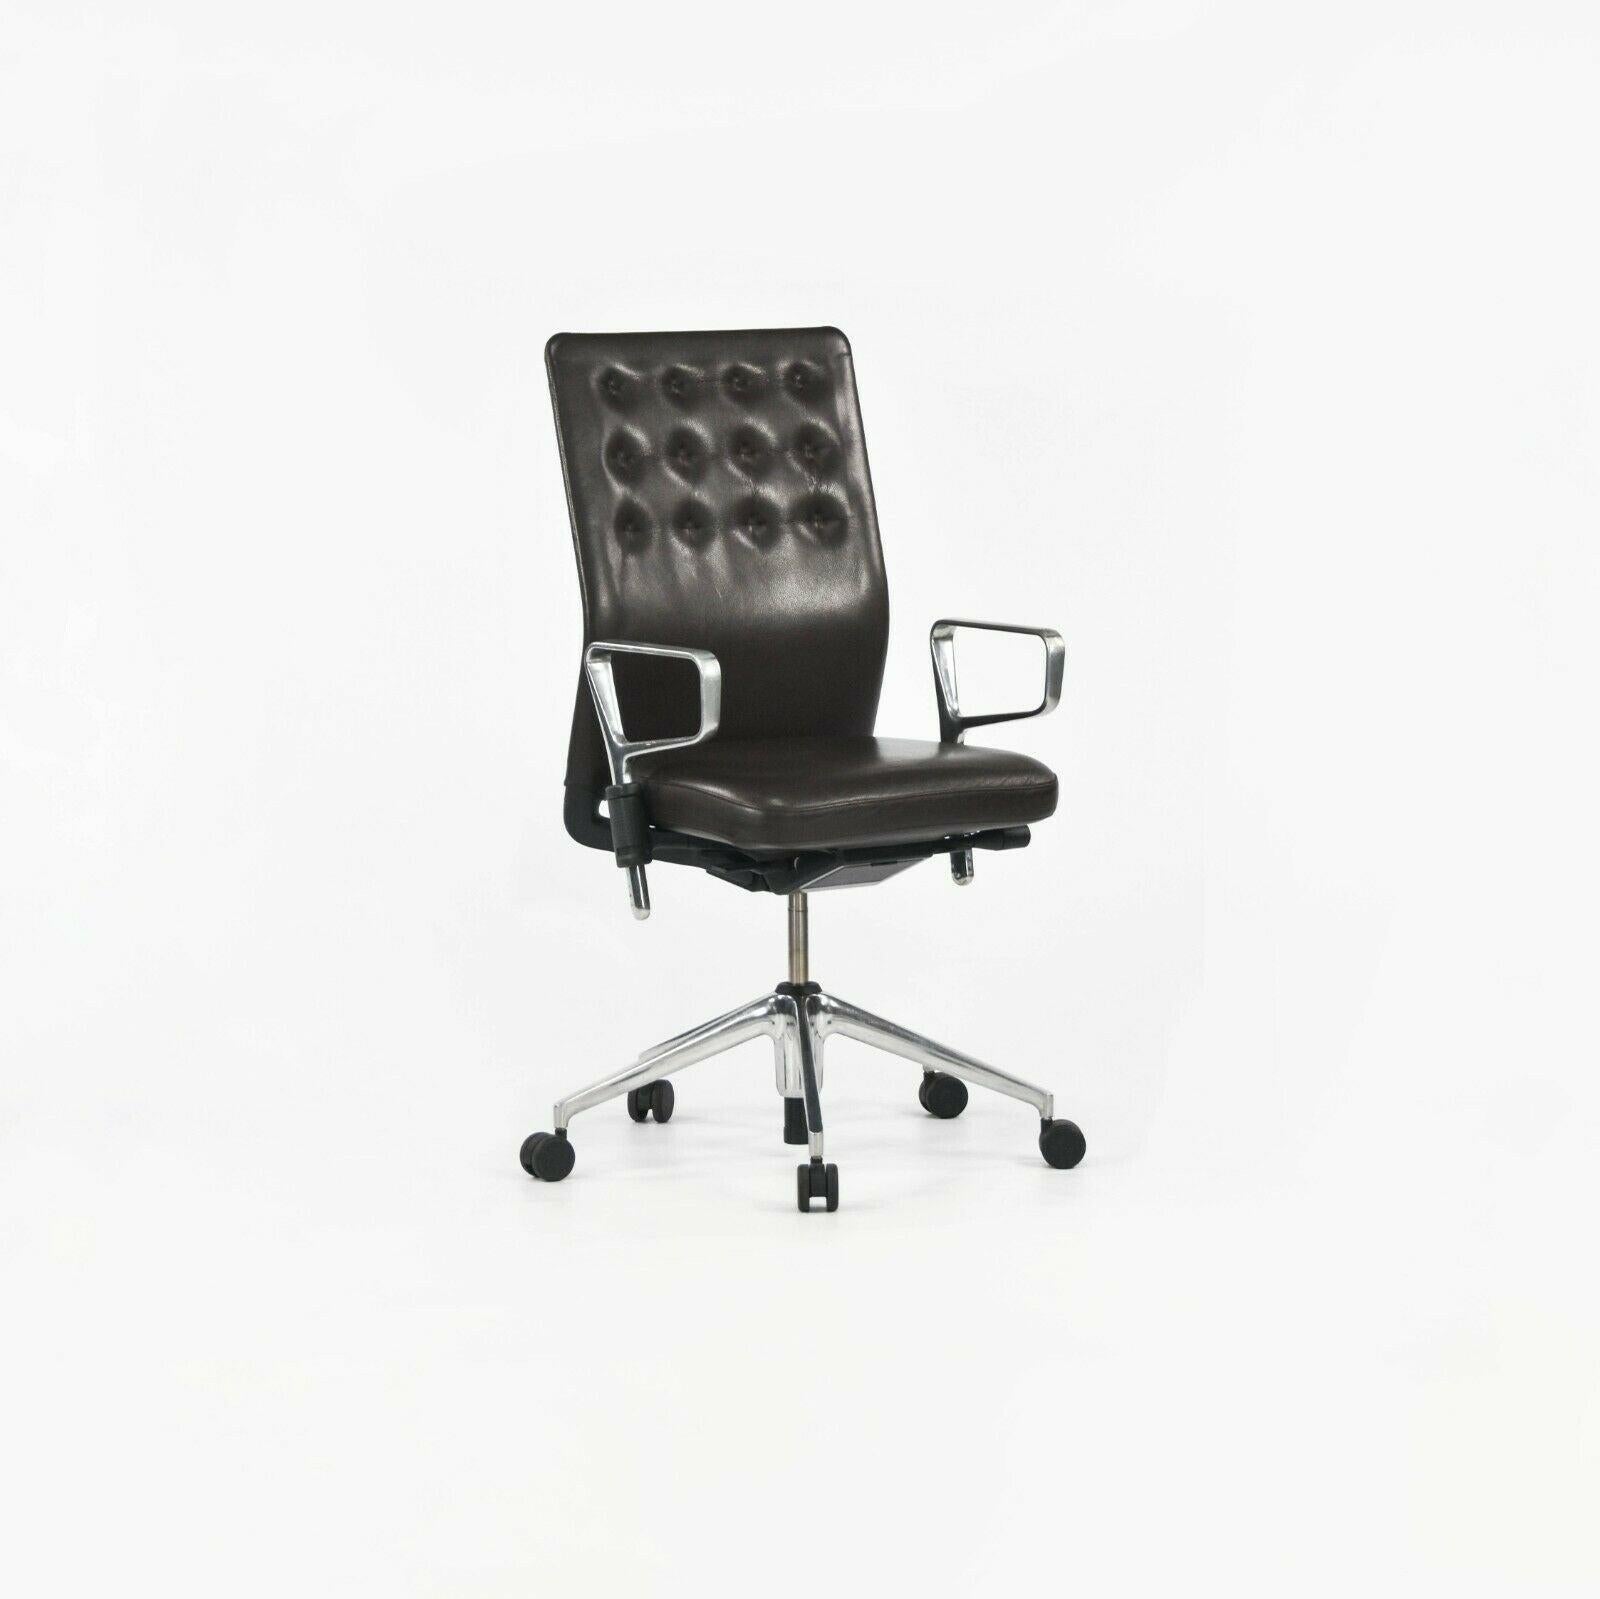 Modern 2012 Vitra ID Trim Desk Chair Polished Aluminum & Leather by Antonio Citterio For Sale